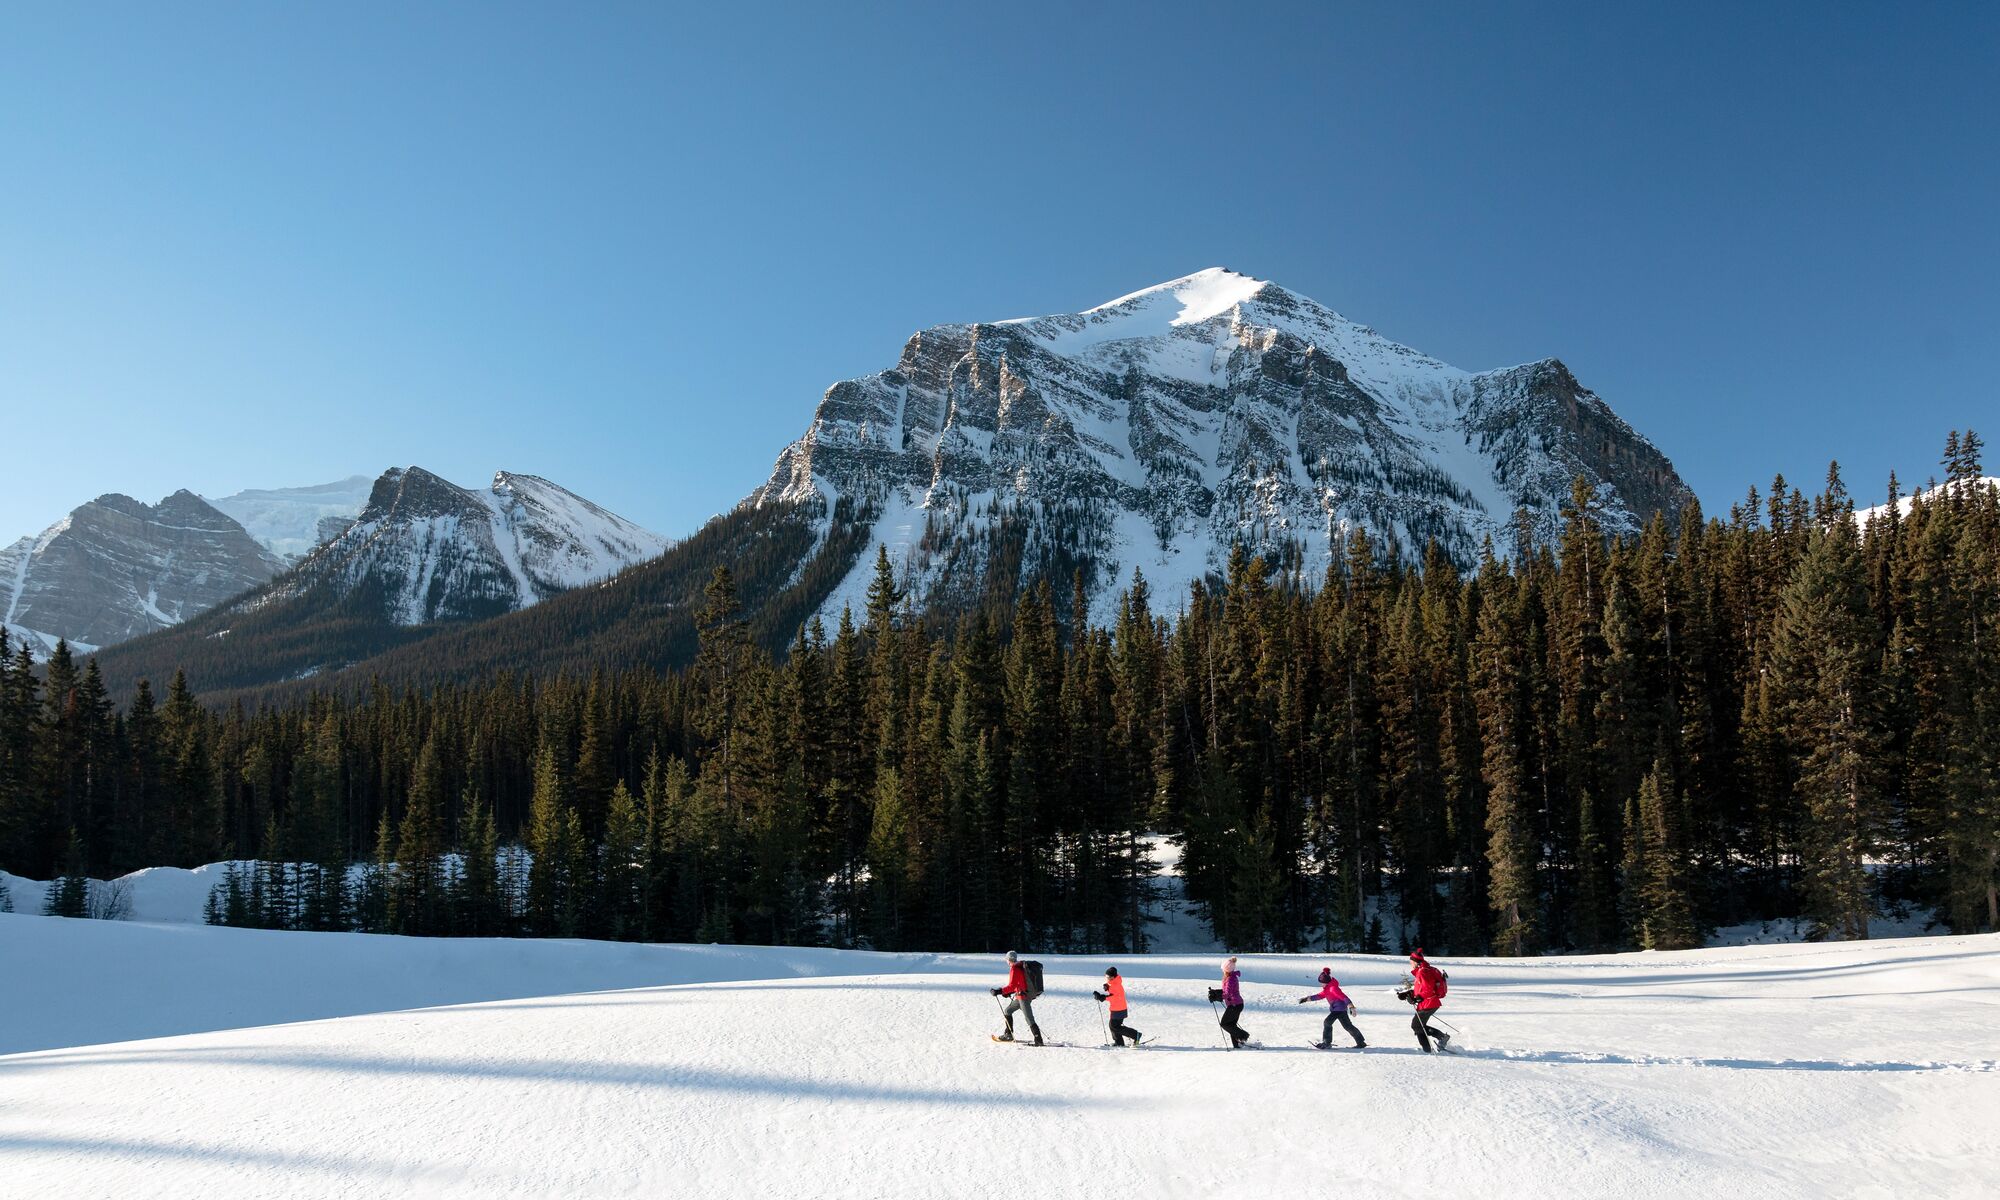 A snowshoe guide brings a group of snowshoers along at the base of Mount Fairview in Lake Louise in Banff National Park.